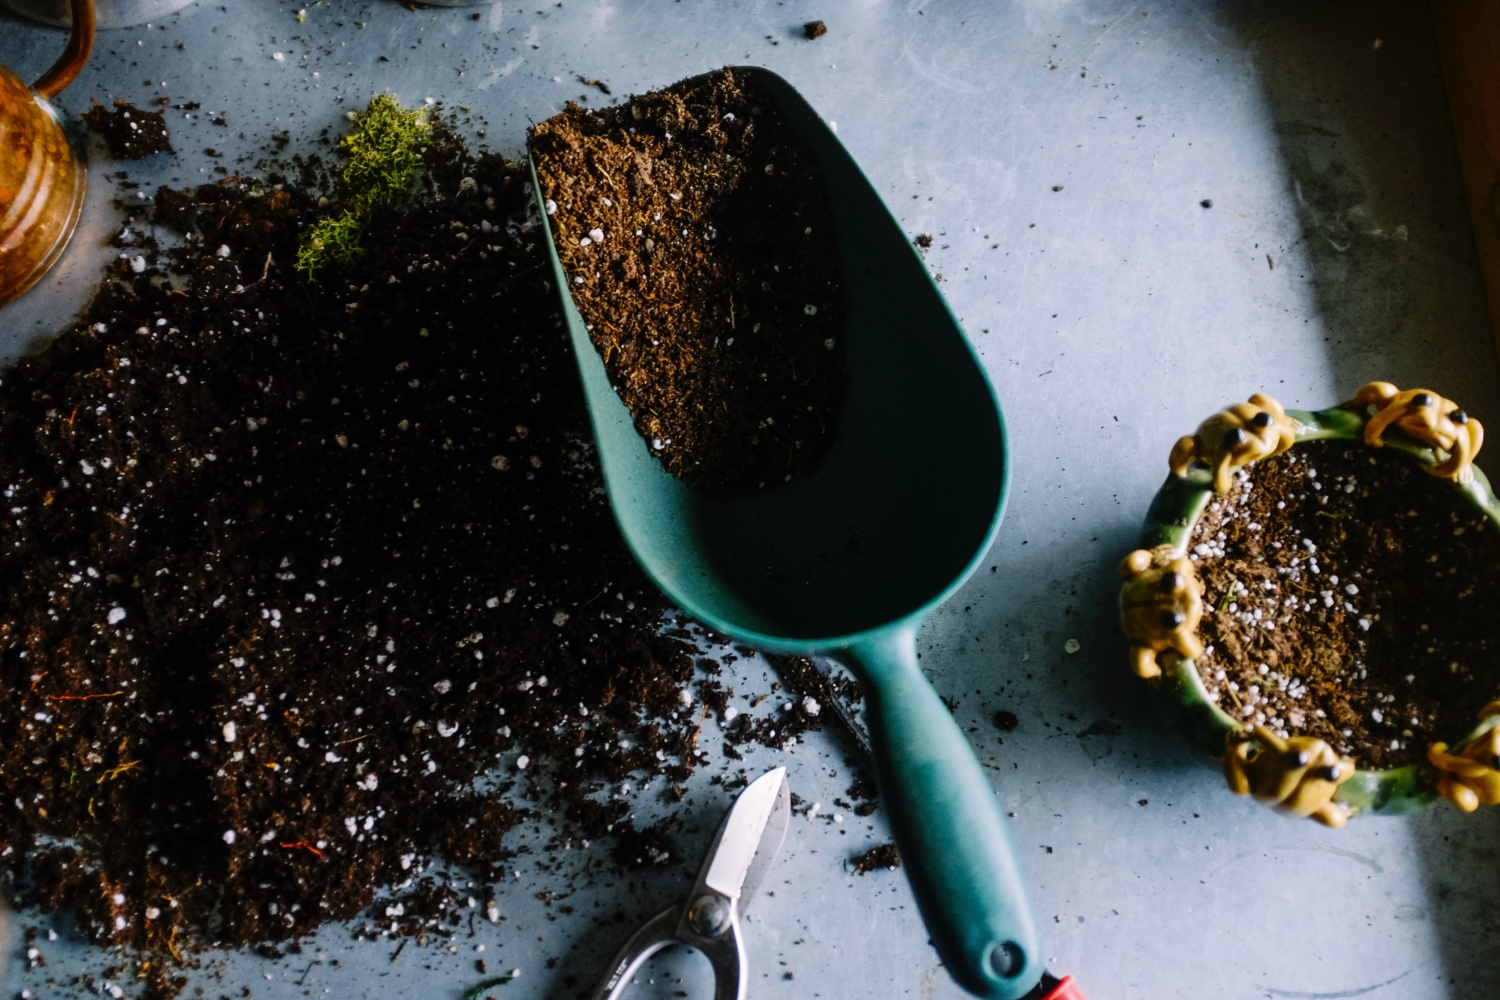 An arial view of a trowel lying on a concrete surface, surrounded by a soil mixture with stony flecks. Be inspired to grow your own in a victory garden at home.